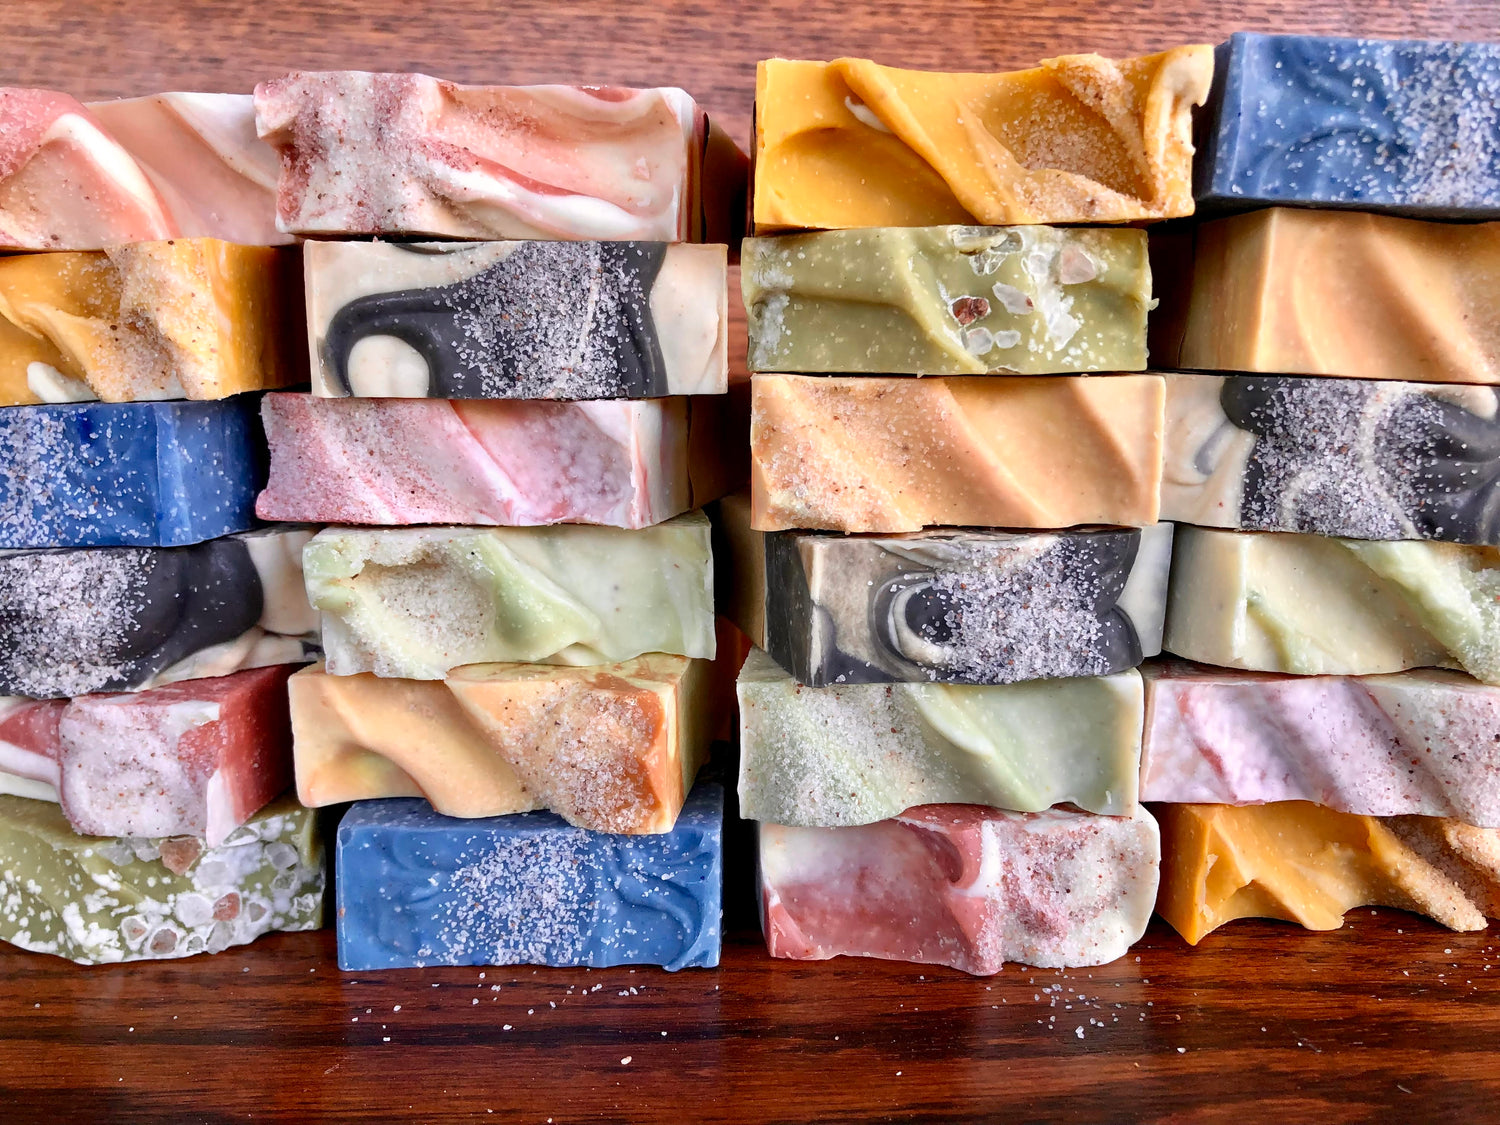 Salt City Soapworks artisanal soaps are gorgeous and great for gift sets, corporate gifts and weddings.